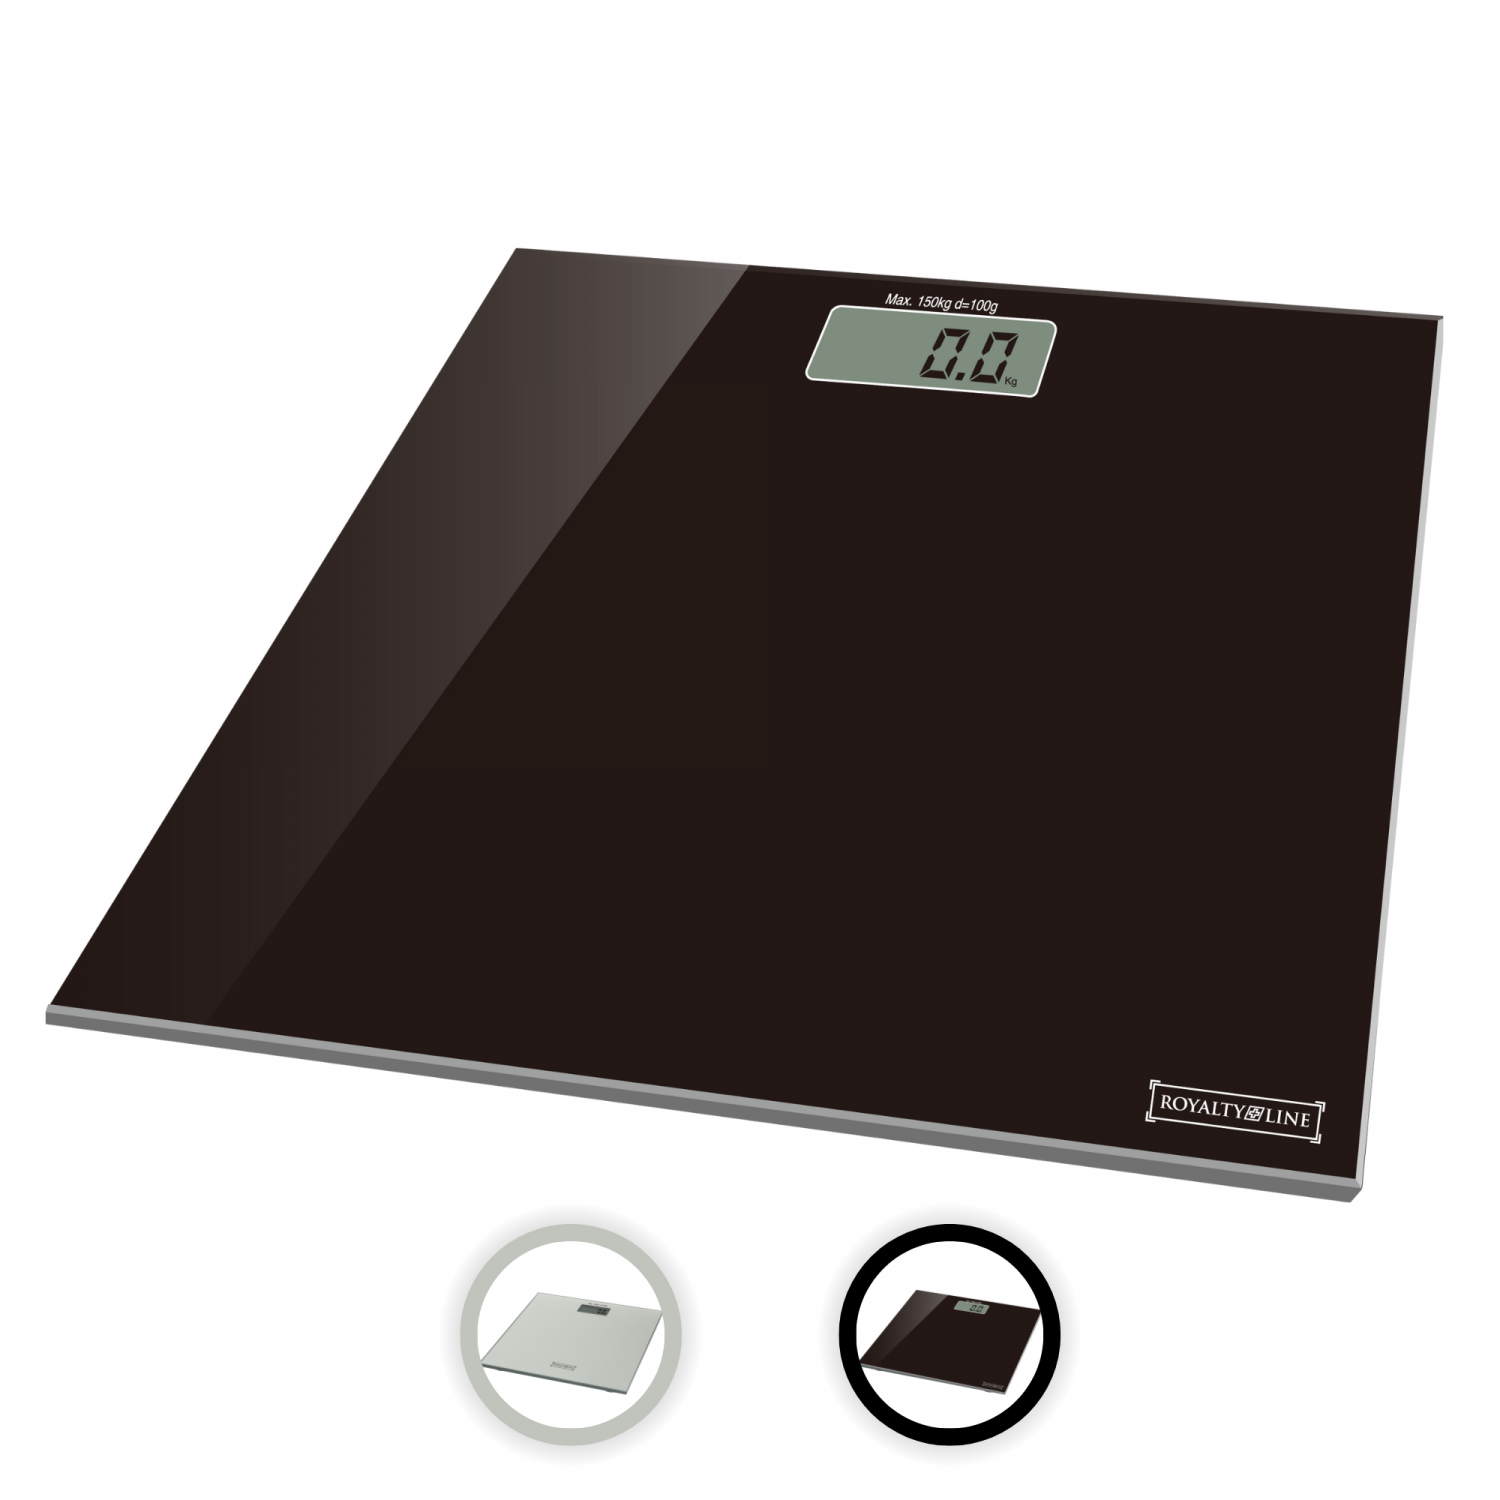 Royalty Line RL-PS3: Digital LED Weight Scale